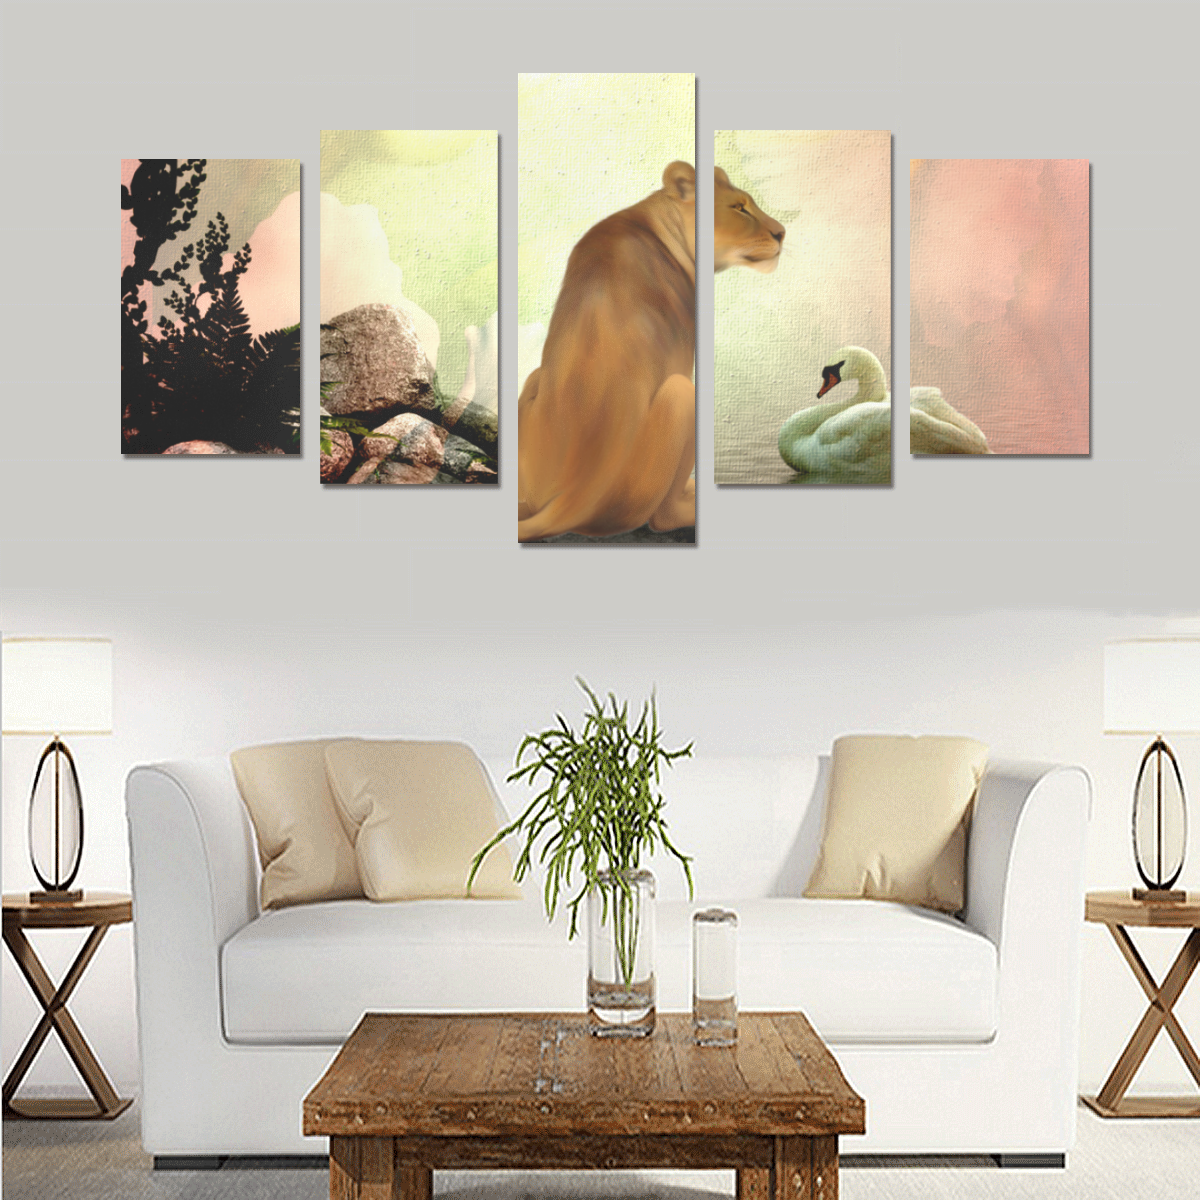 Awesome lioness in a fantasy world Canvas Print Sets C (No Frame)